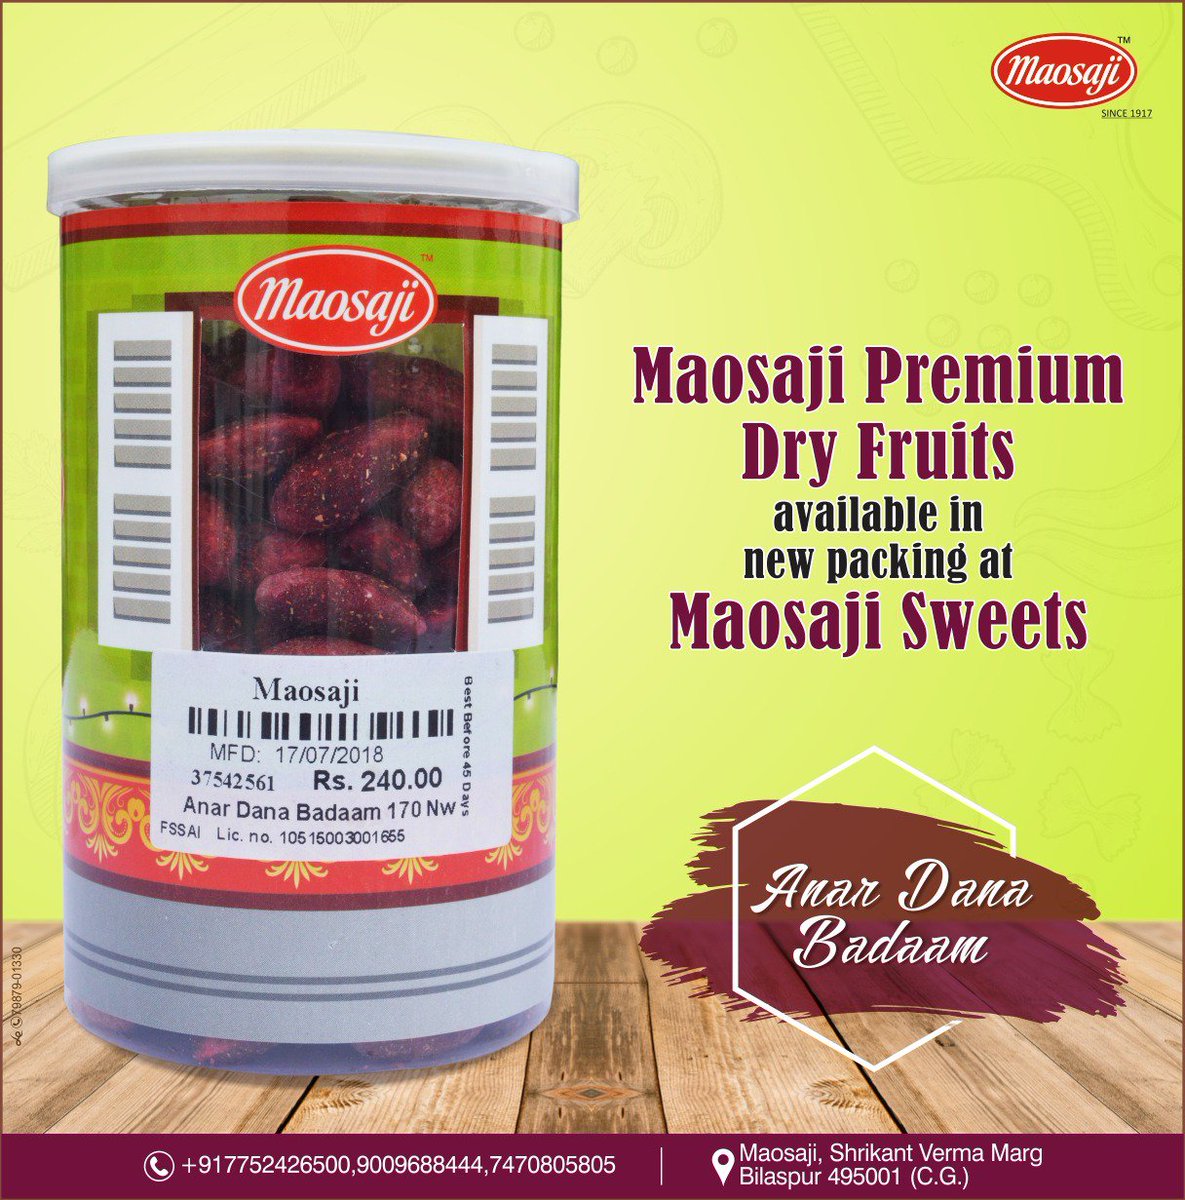 This #festive season enjoy our new #PremiumDryFruits available in new packing only at #MaosajiSweets.
#ContactUs: 90096-88444, 74708-05805, +91 7752 426500.